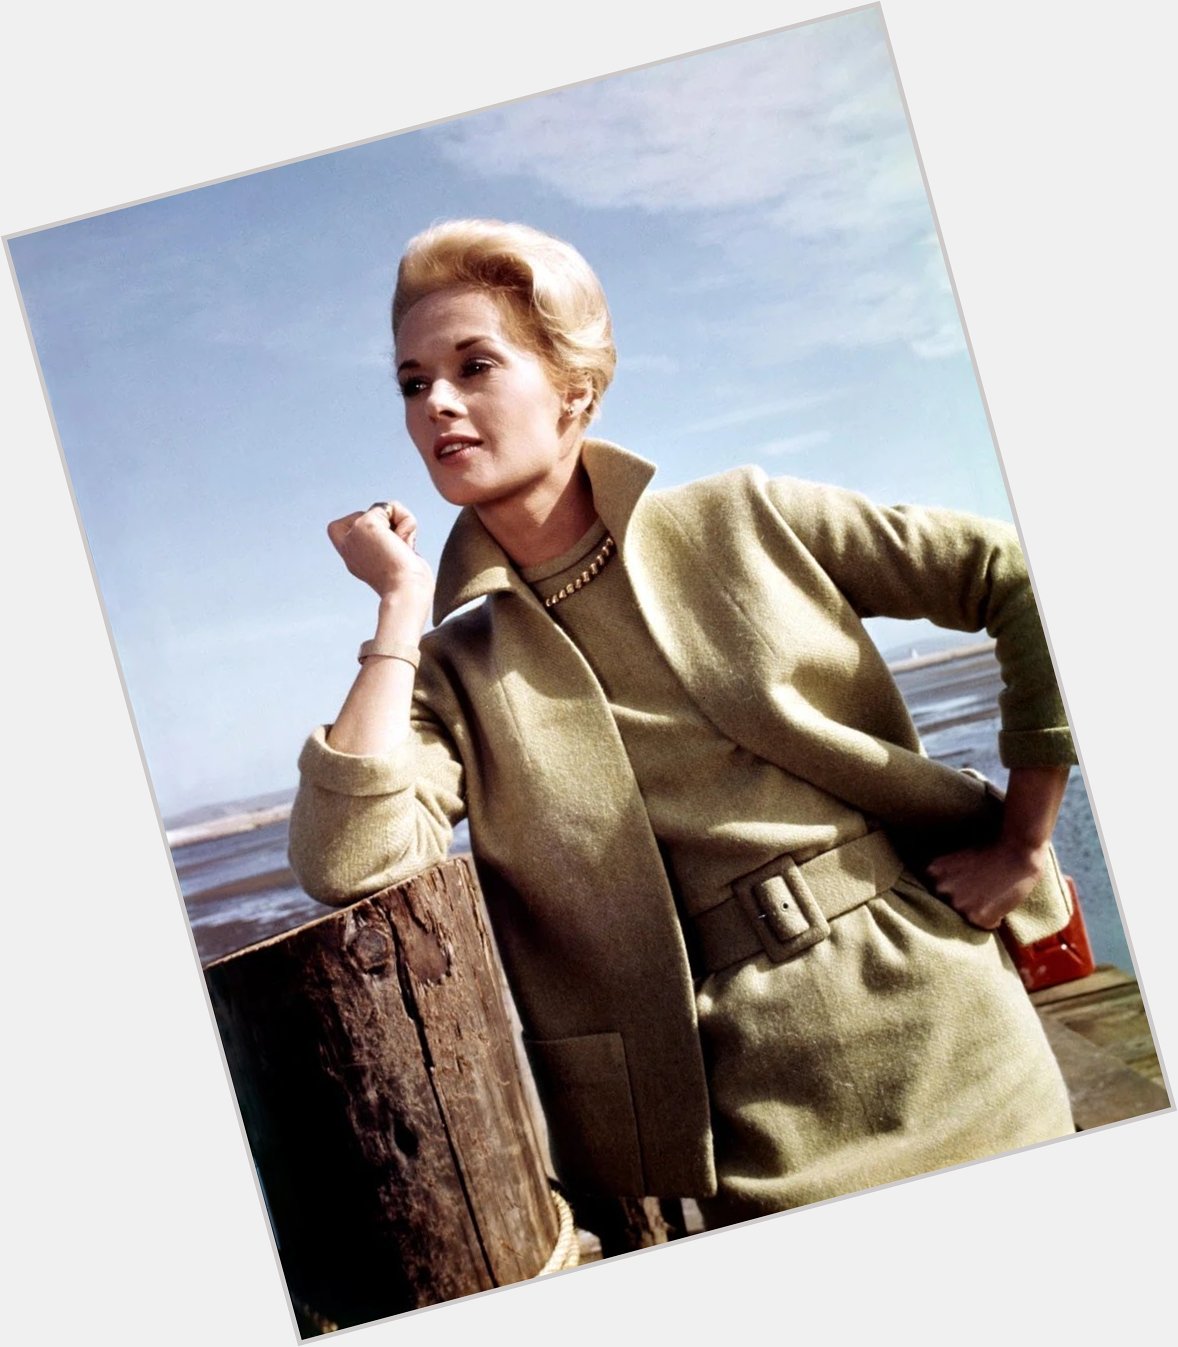 Happy Tippi Hedren s birthday to all who celebrate (how I adore the iconic Edith Head designed eau de nil suit) 